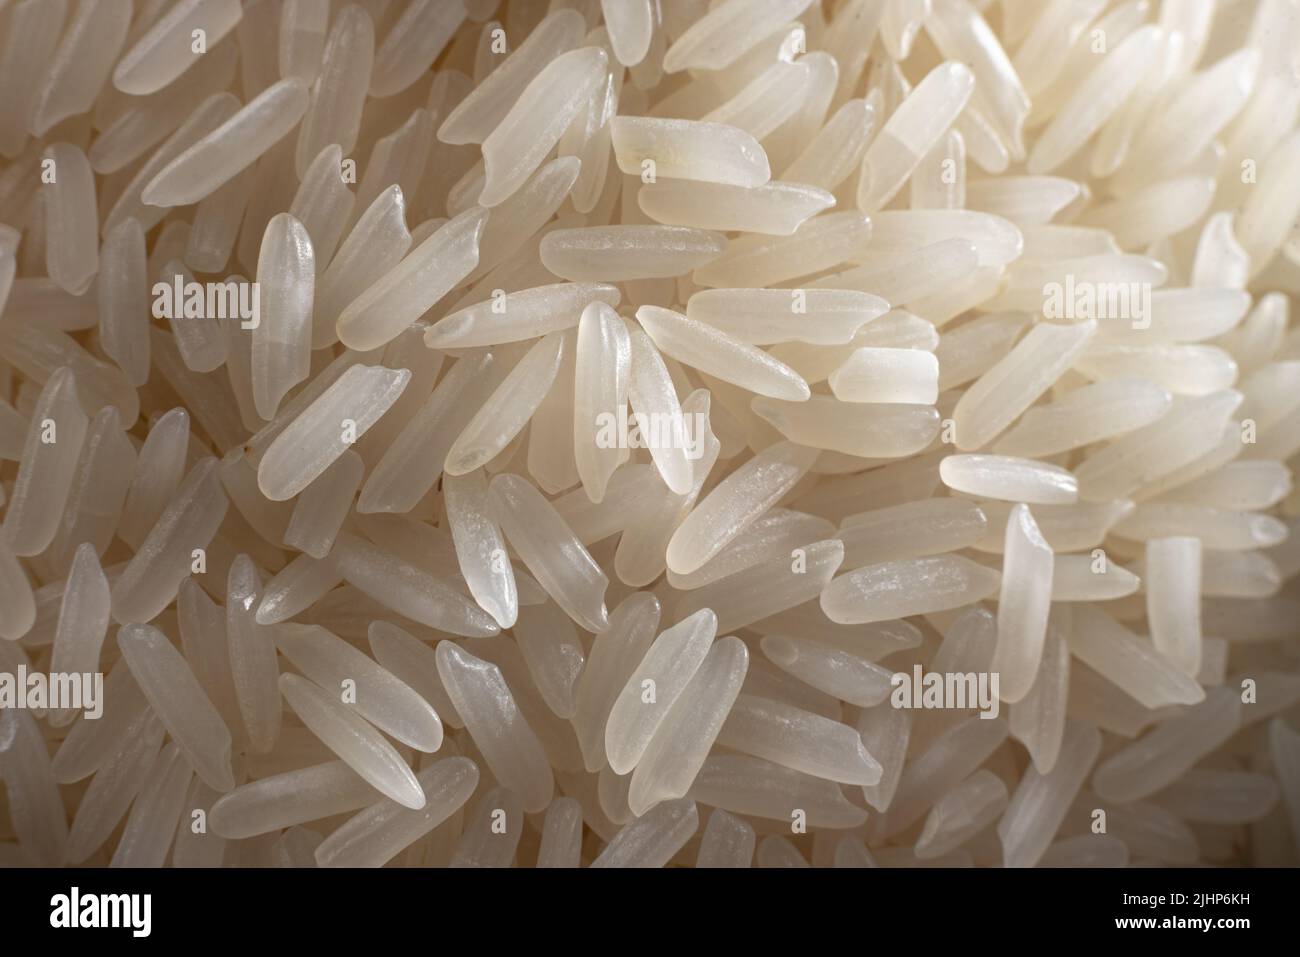 Rice Grain Close Up Stock Photo, Picture and Royalty Free Image. Image  19431633.